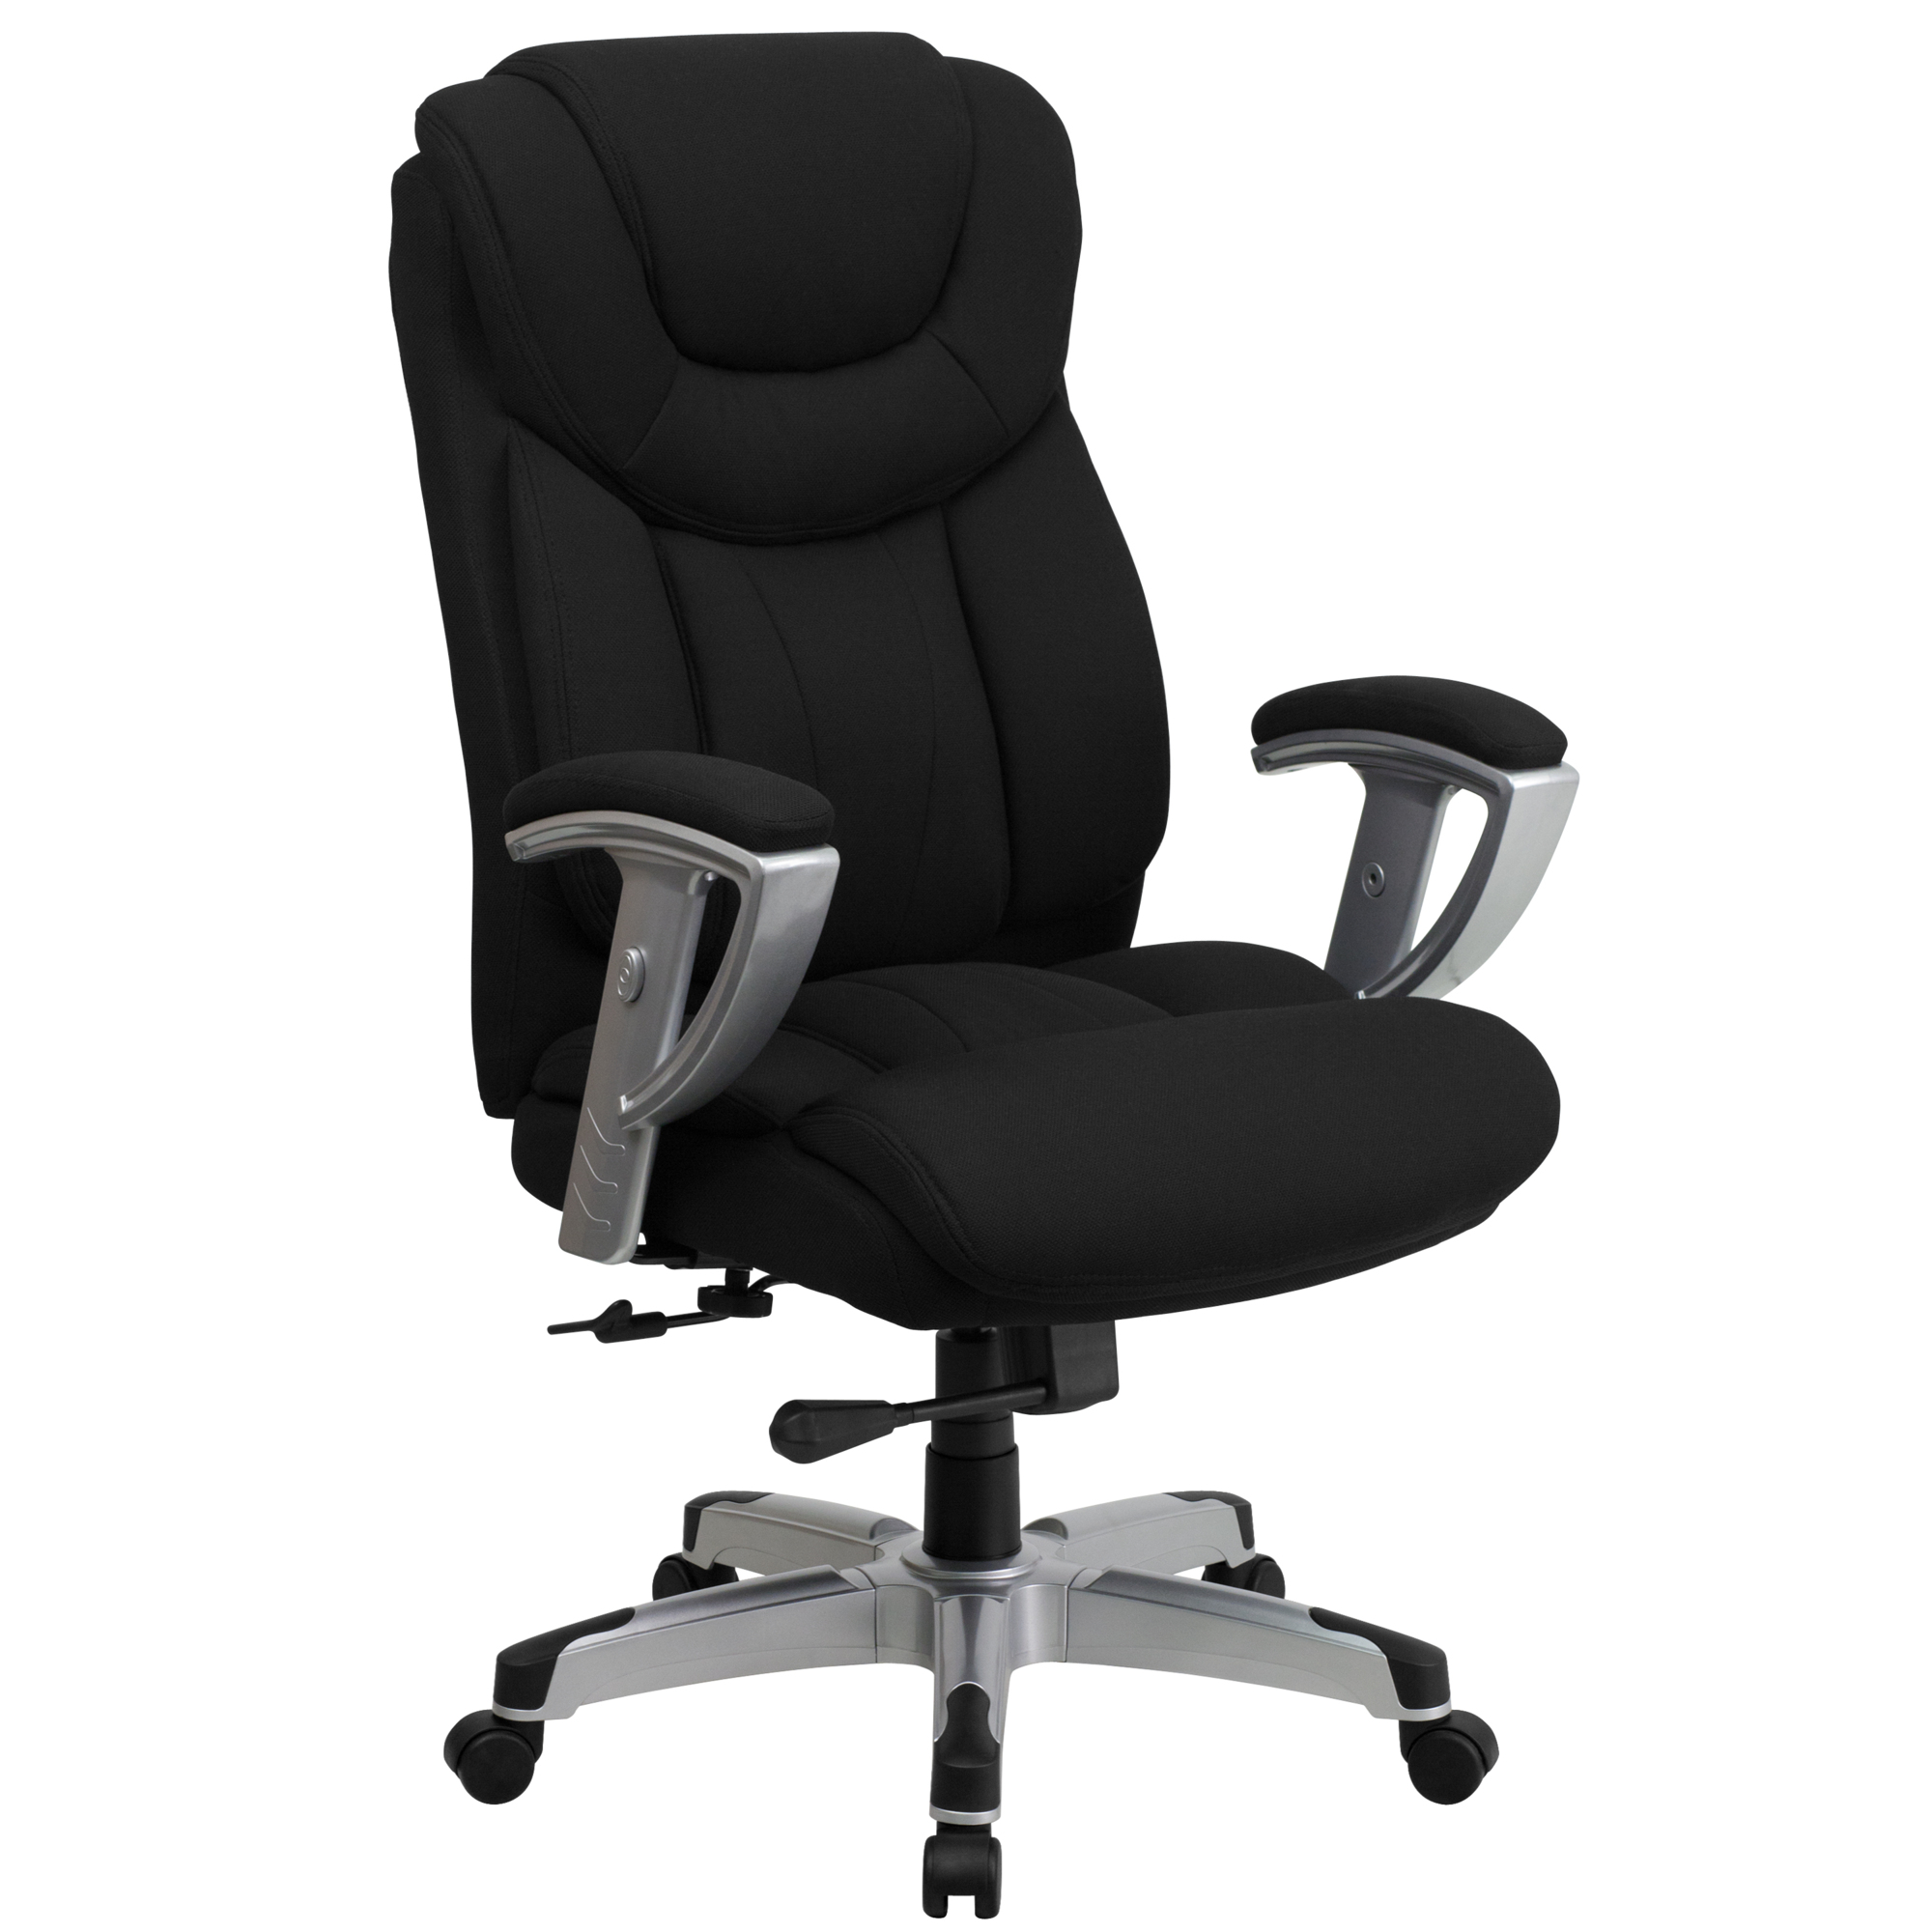 Flash Furniture, 400 lb. Rated High Back Black Fabric Chair, Primary Color Black, Included (qty.) 1, Model GO1534BKFAB